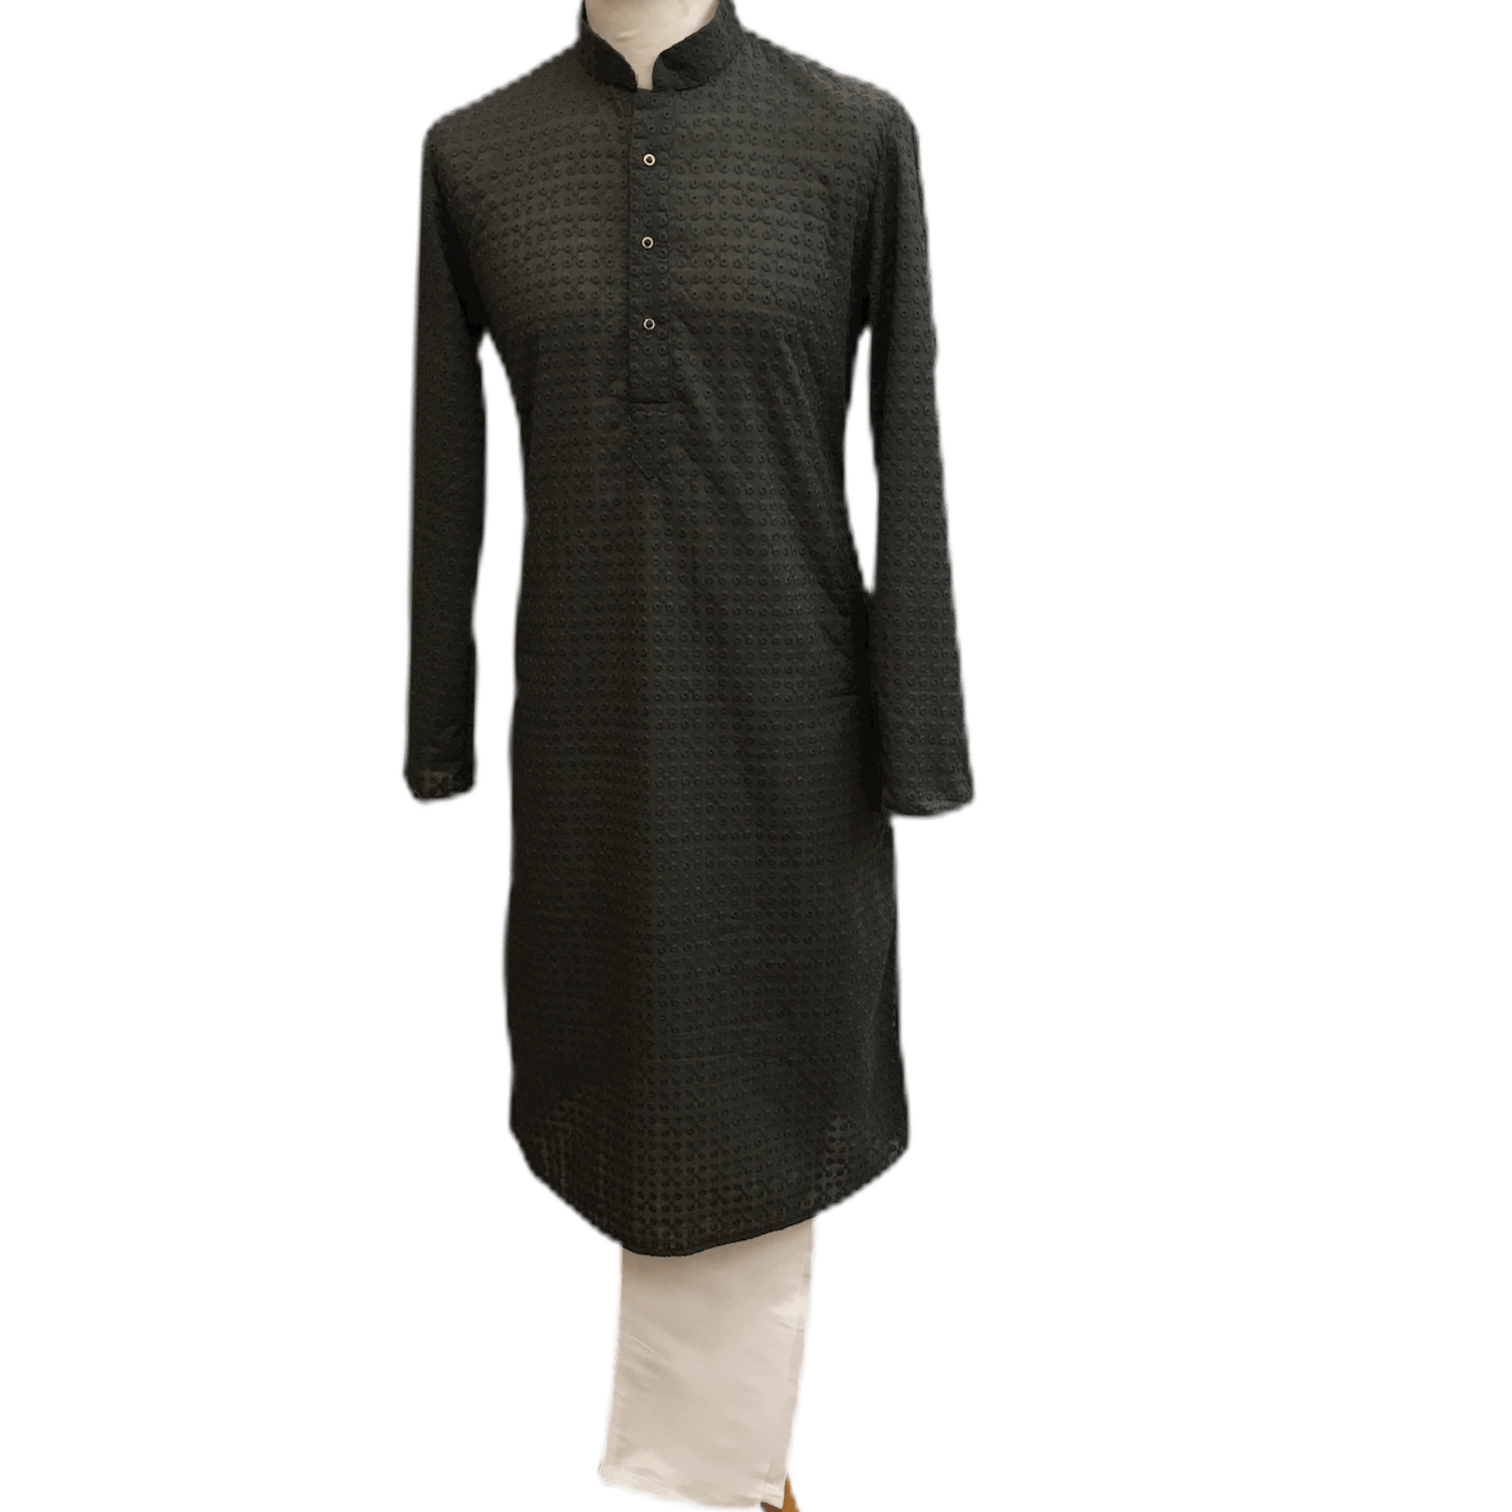 Mens Indian Kurta set in Dark Grey, for weddings, Bollywood Party ( with Draw stringed trousers) - Farari KR1219 - Prachy Creations